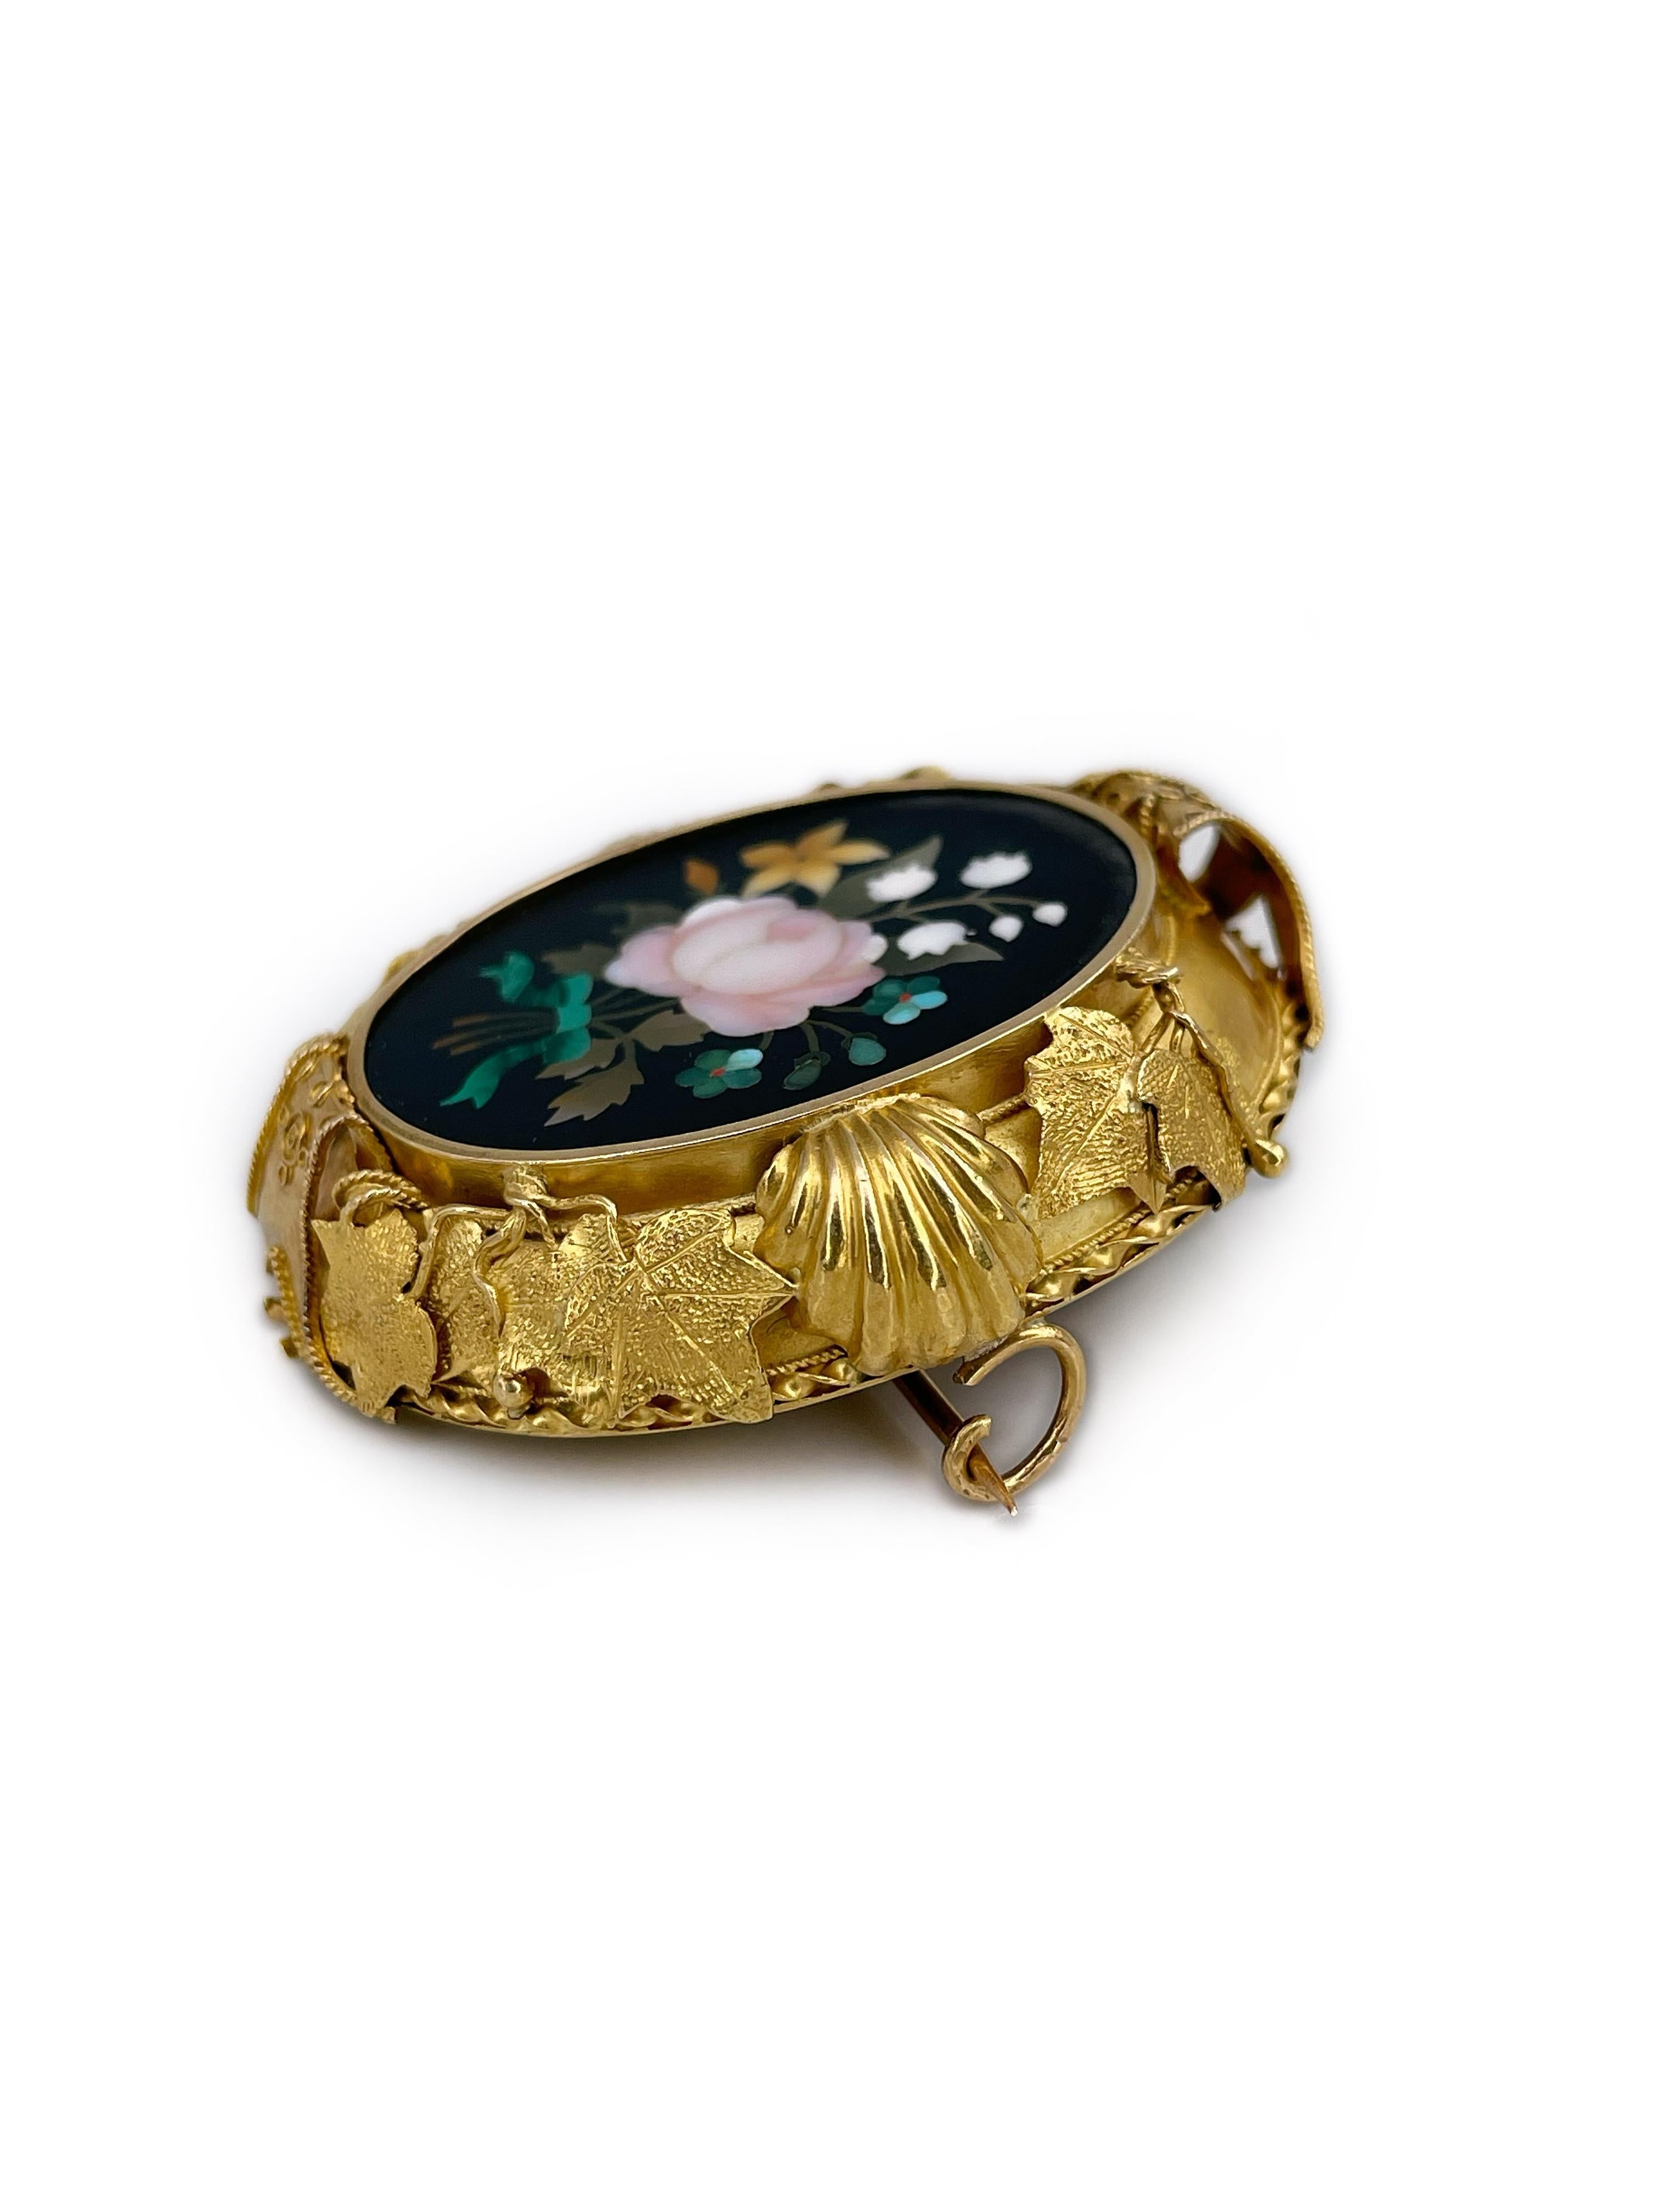 This is a lovely Victorian oval floral mosaic pin brooch crafted in 18K gold. The piece features semi precious stones cut and inlaid using Pietra dura mosaic technique. 

It has a very decorative frame. Unfortunately, one segment of the frame top is